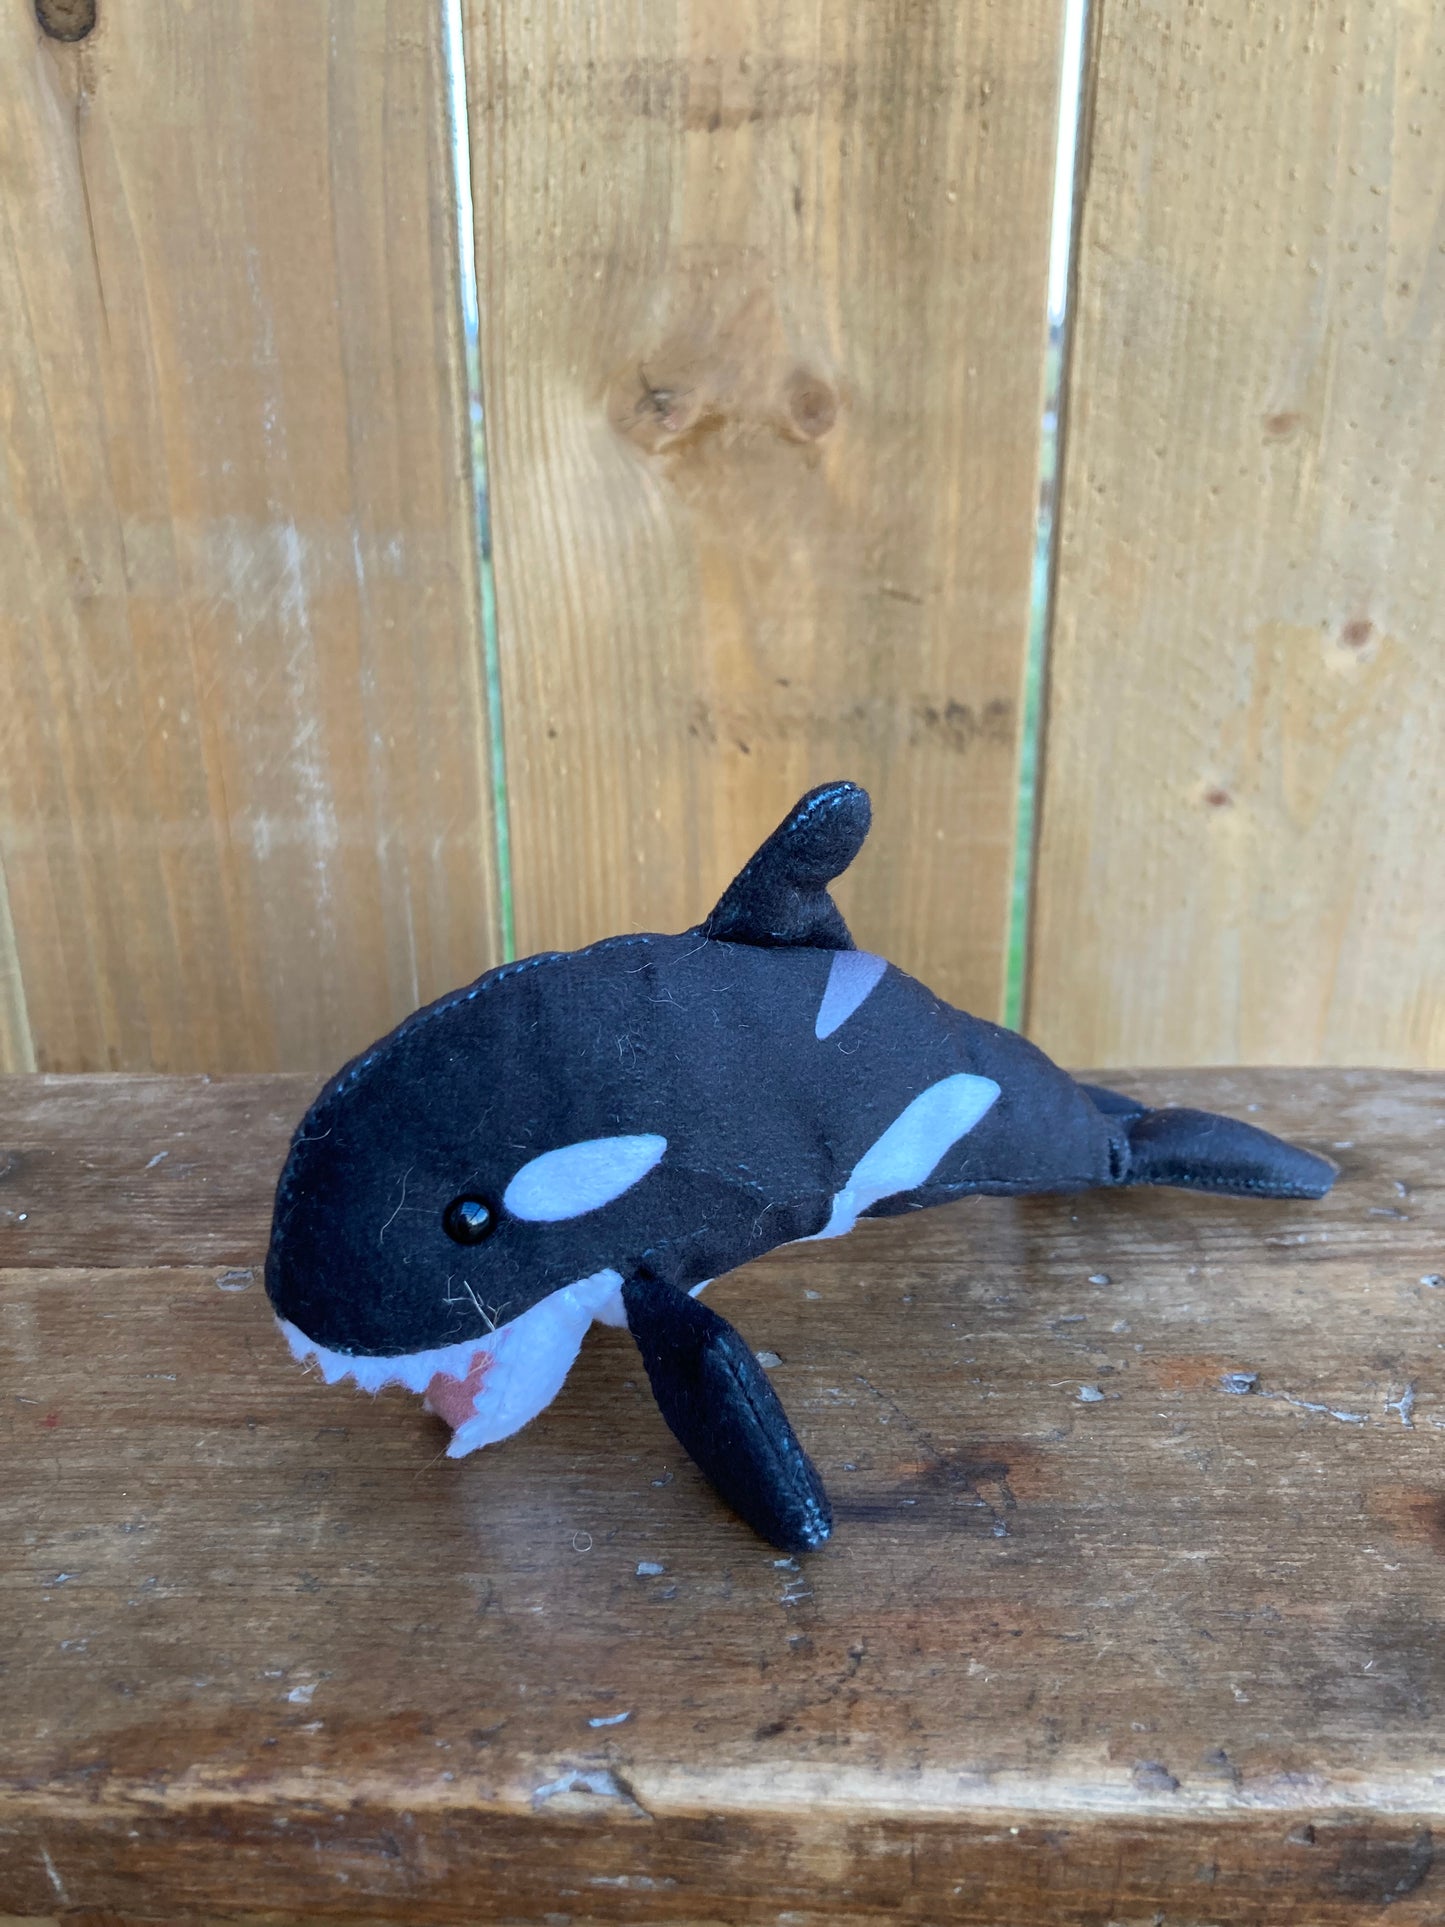 Soft Toy Finger Puppet - ORCA (Killer Whale)